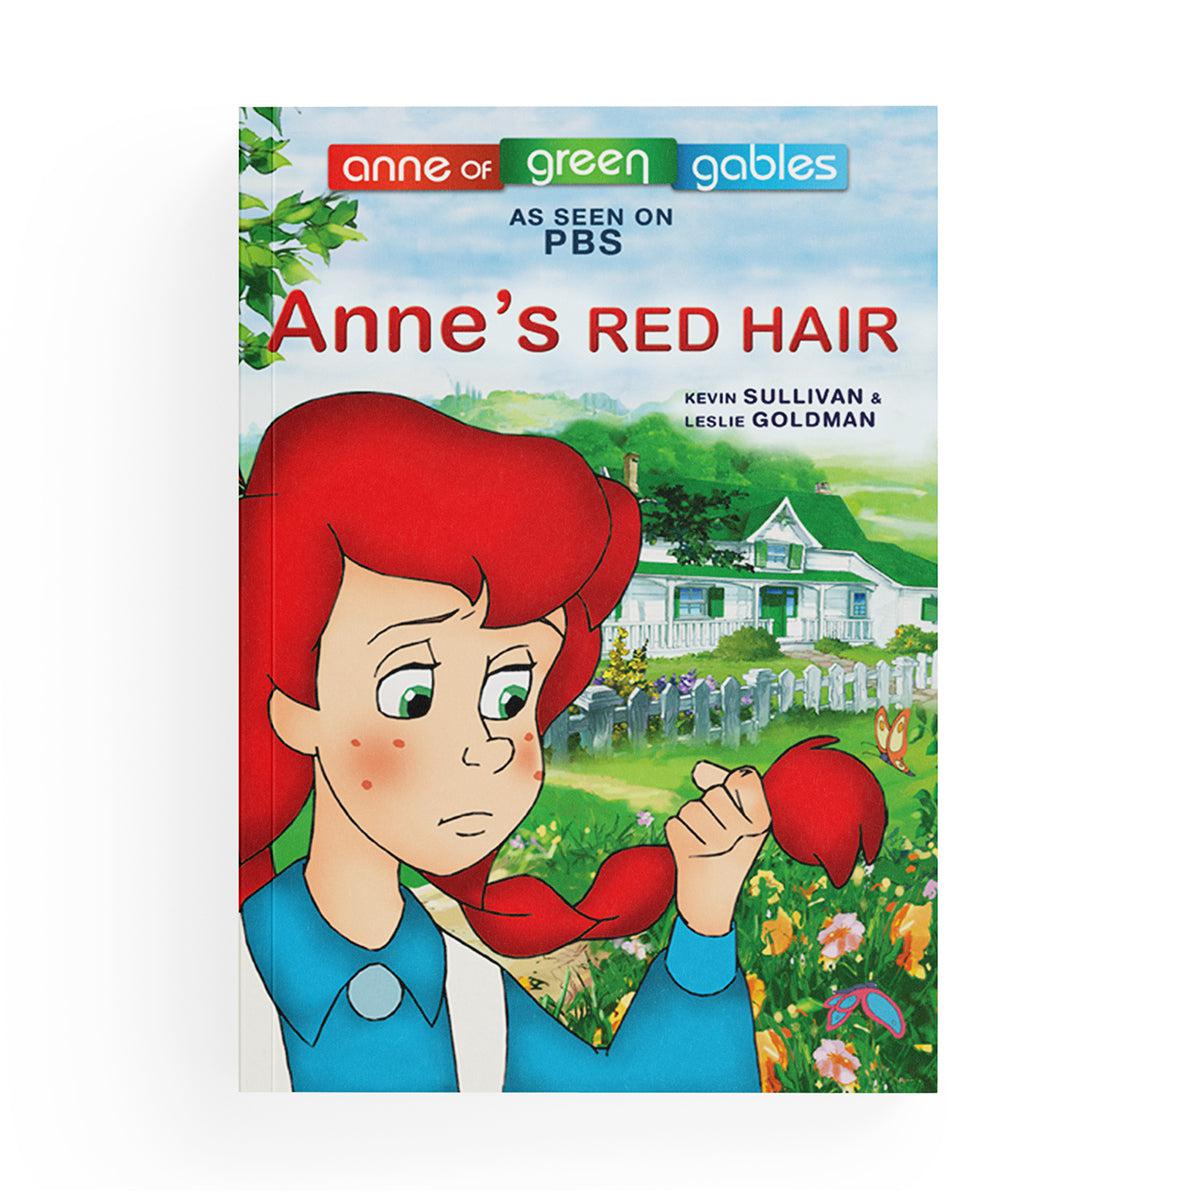 Anne: The Animated Series - Anne's Red Hair  (LEVEL 1 READER)